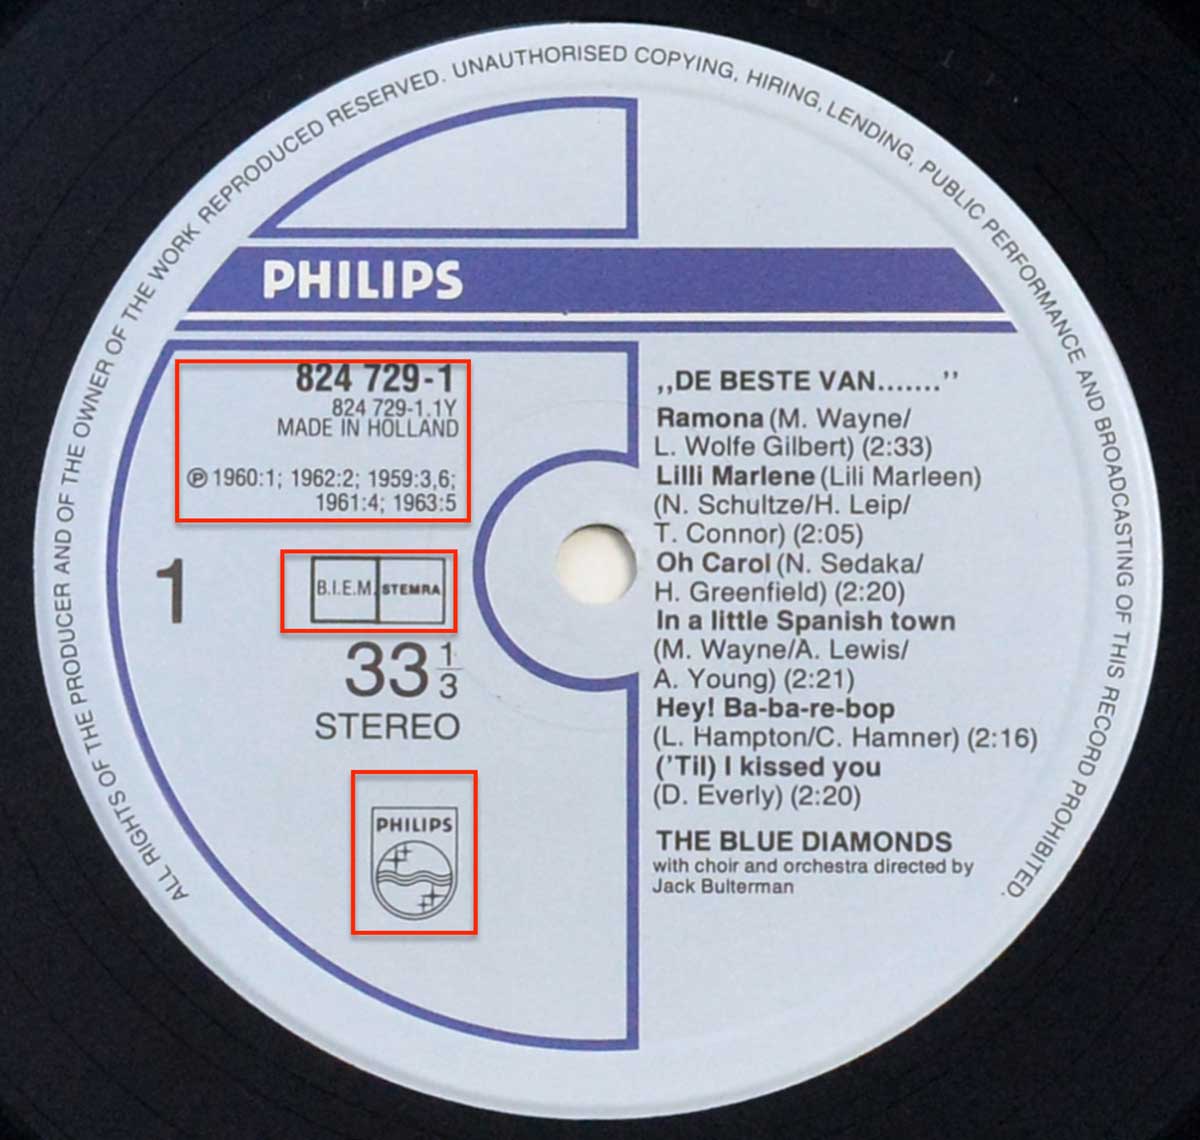 Close up of the record's label with important areas highlighted